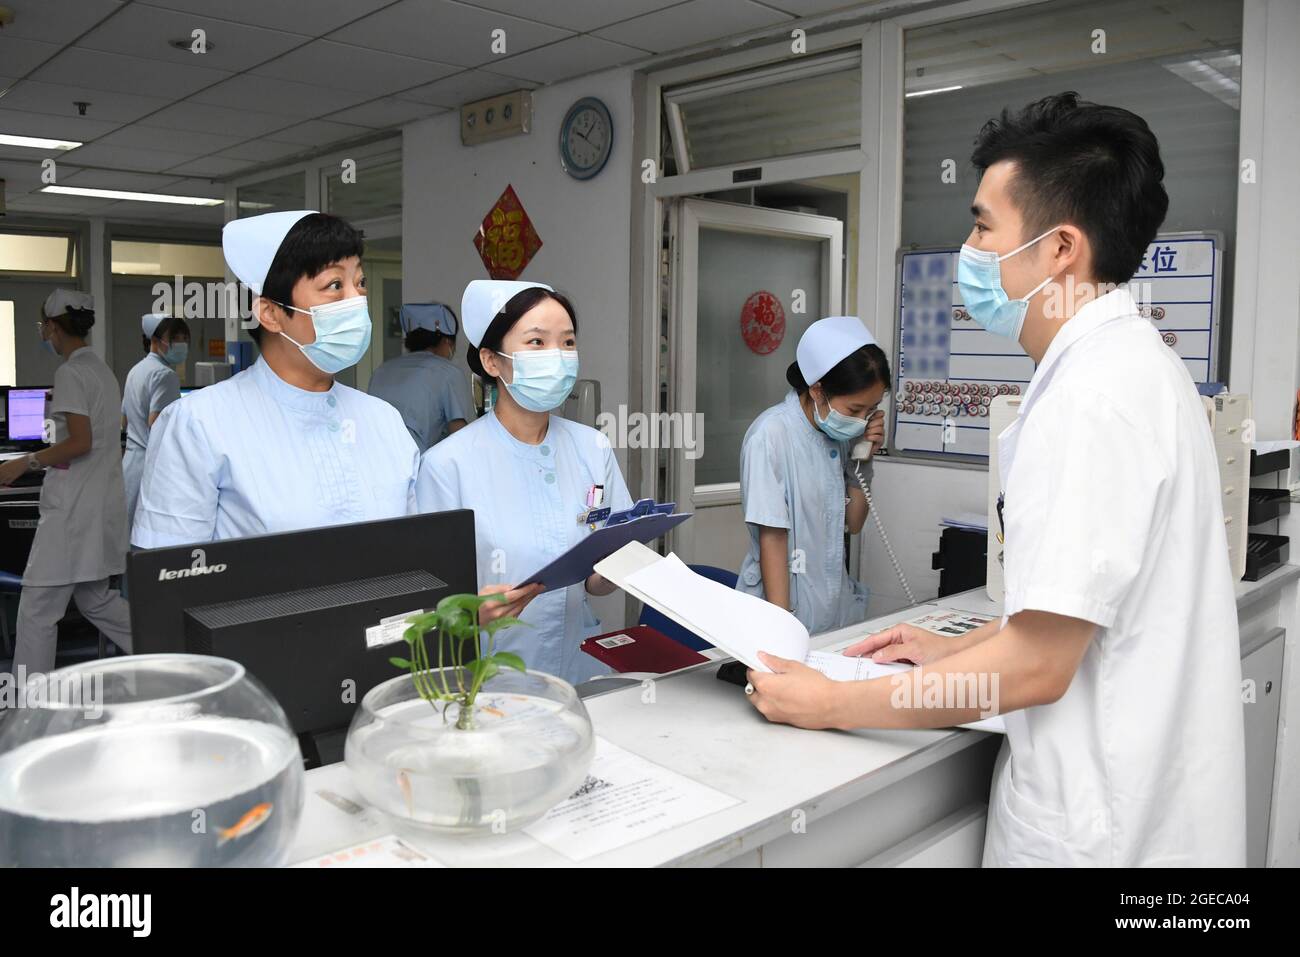 (210819) -- BEIJING, Aug. 19, 2021 (Xinhua) -- Ma Yuan (R) learns about patients' conditions from nurses at Haidian Hospital in Beijing, capital of China, Aug. 12, 2021. Ma Yuan, 28, is a resident orthopedic doctor at Haidian Hospital in Beijing. During working hours, Ma needs to attend morning shift meetings, follow superior doctors to make the rounds of the wards, participate in surgeries and etc. Sometimes Ma has to work continuously for up to 36 hours. Although the workflow is the same almost every day, there are different challenges in clinical work. As a young doctor, Ma often deals w Stock Photo